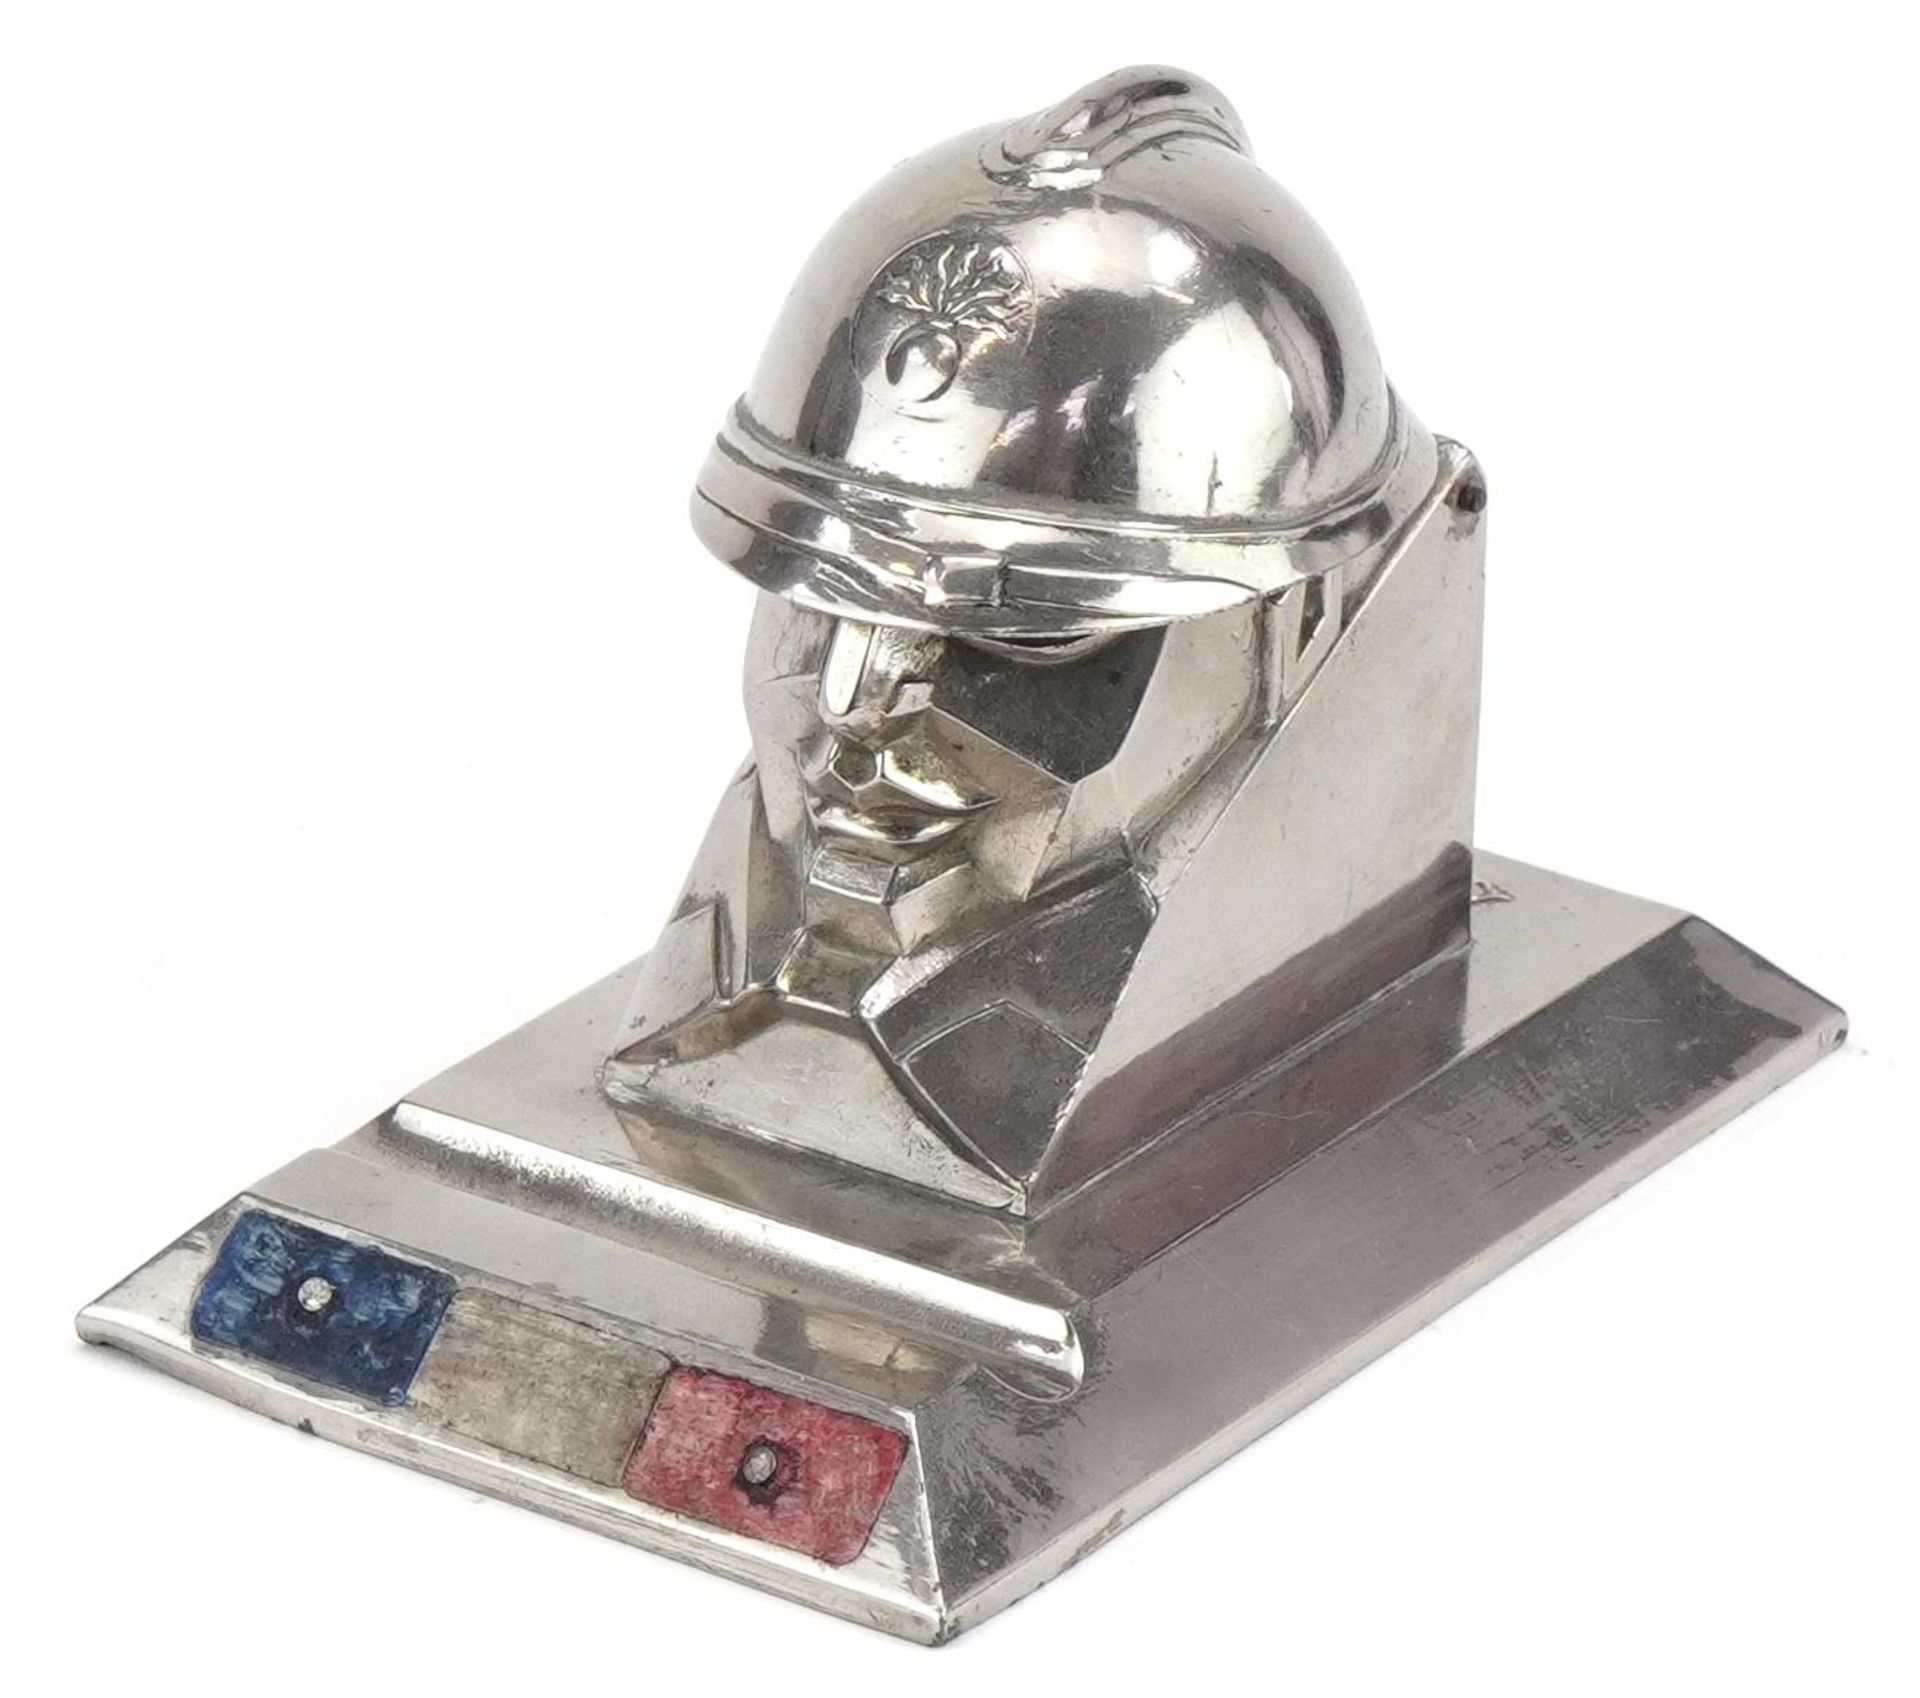 Richer of Paris, vintage French novelty silvered metal desk inkwell in the form of a fireman with